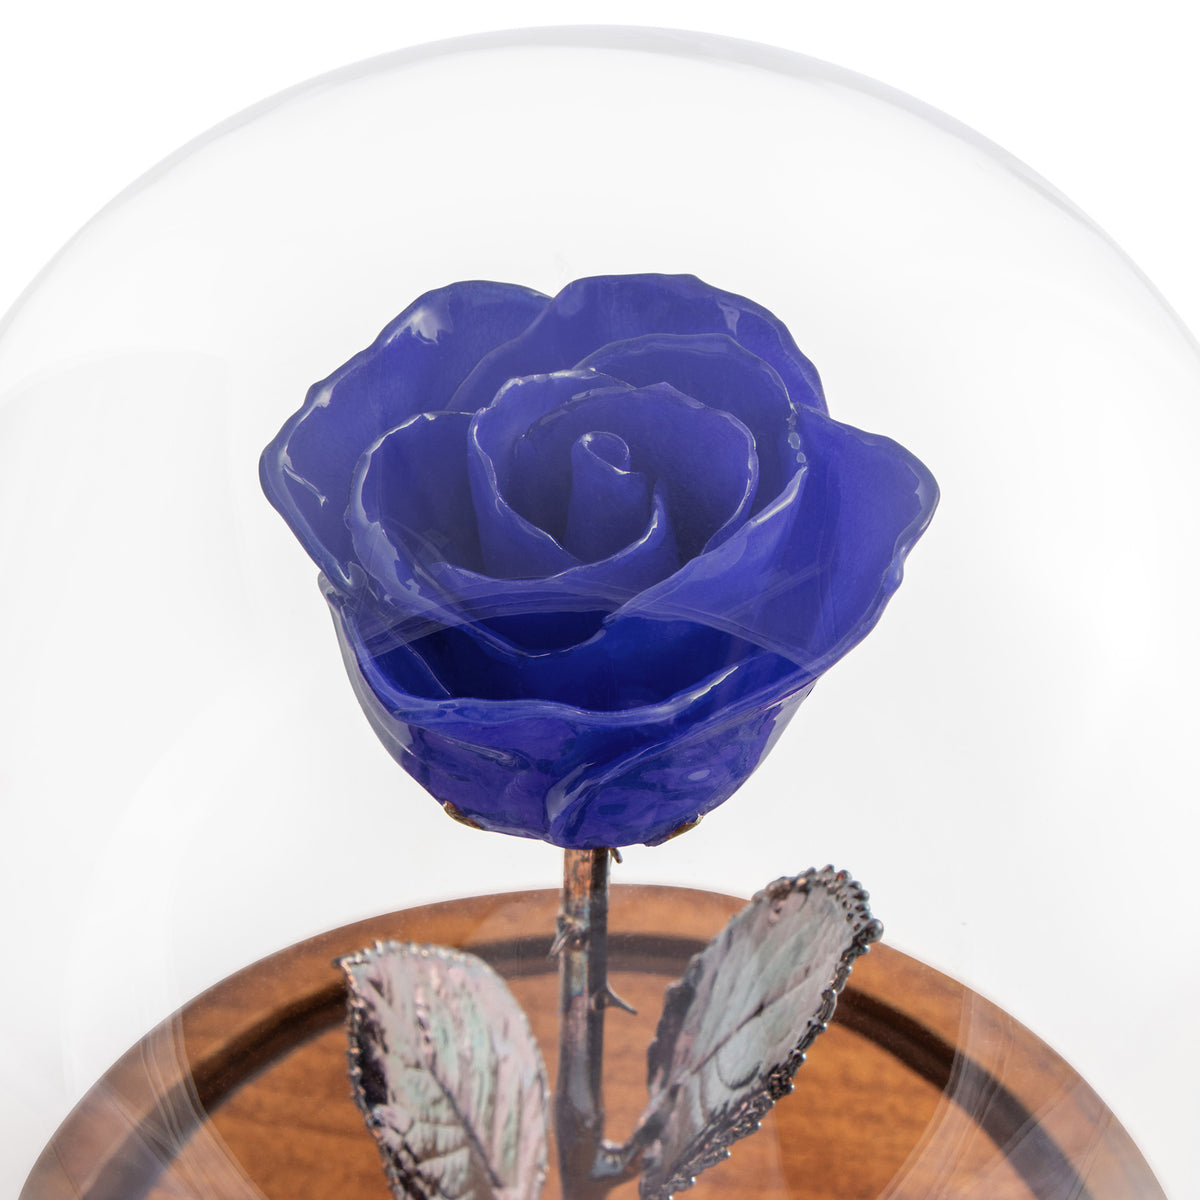 Violet Pearl Enchanted Rose (aka Beauty &amp; The Beast Rose) with Patina Copper Stem Mounted to A Hand Turned Solid Wood Base under a glass dome.